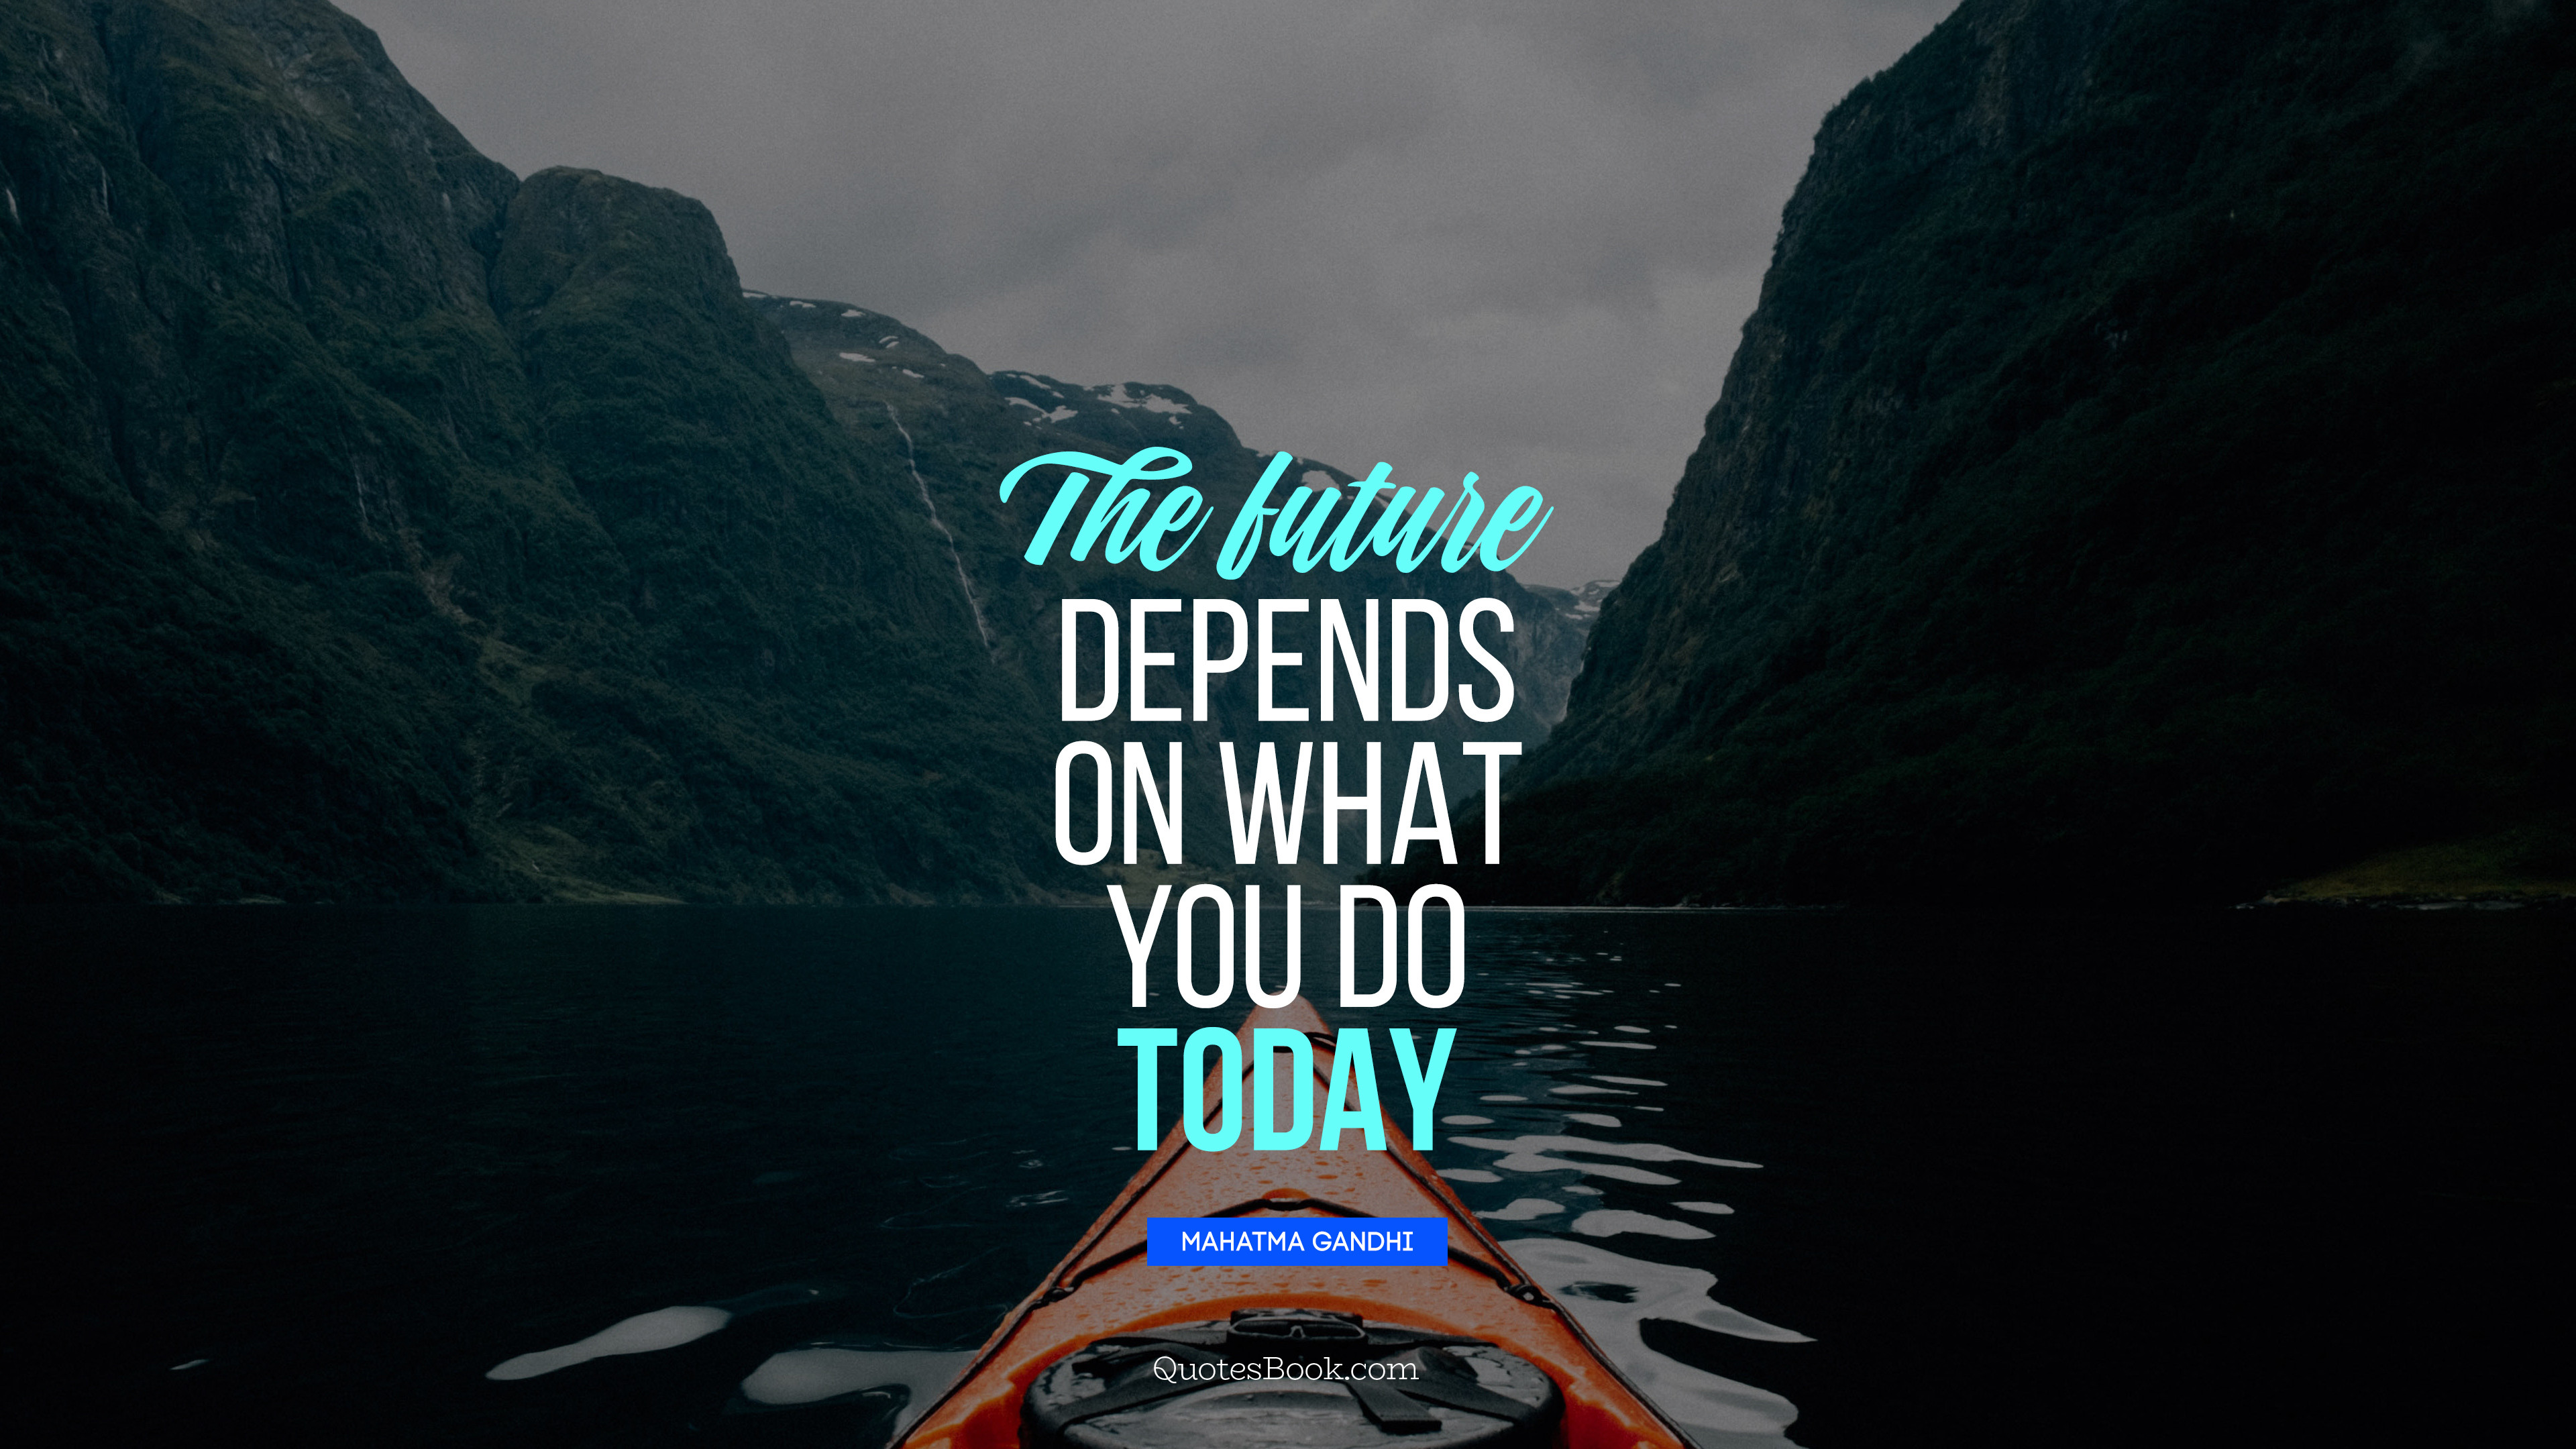 The future depends on what you do today. - Quote by Mahatma Gandhi